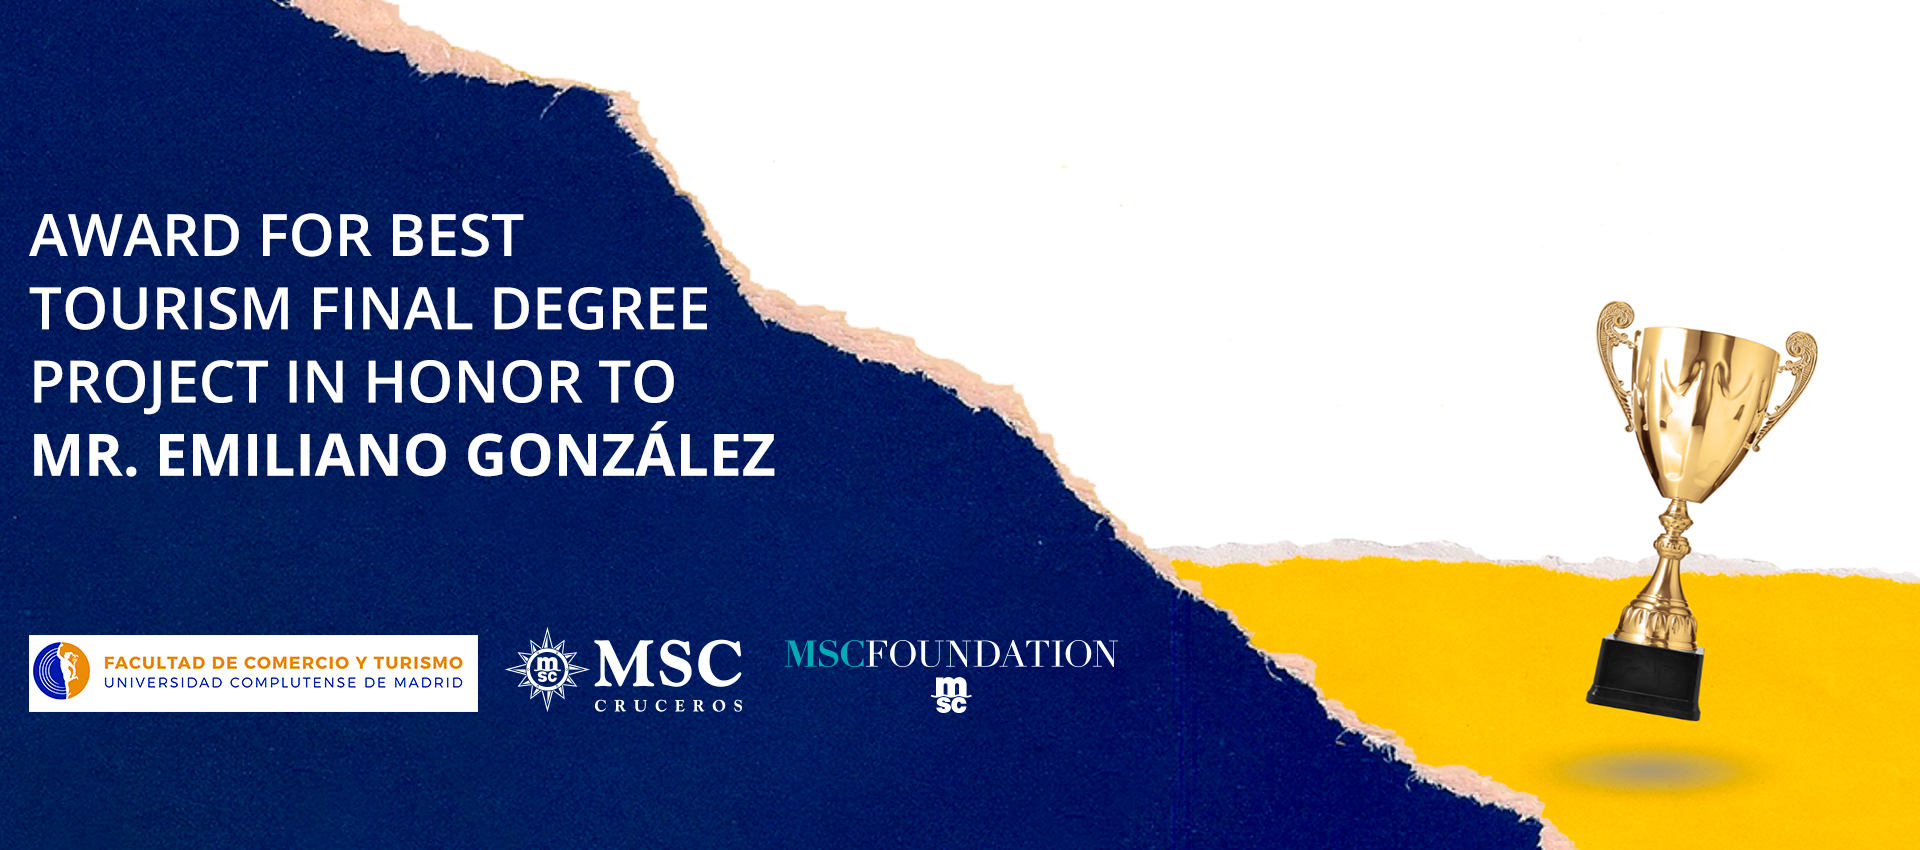 MSC Foundation launches award for ‘Best Tourism Final Degree Project’   |  MSC Foundation